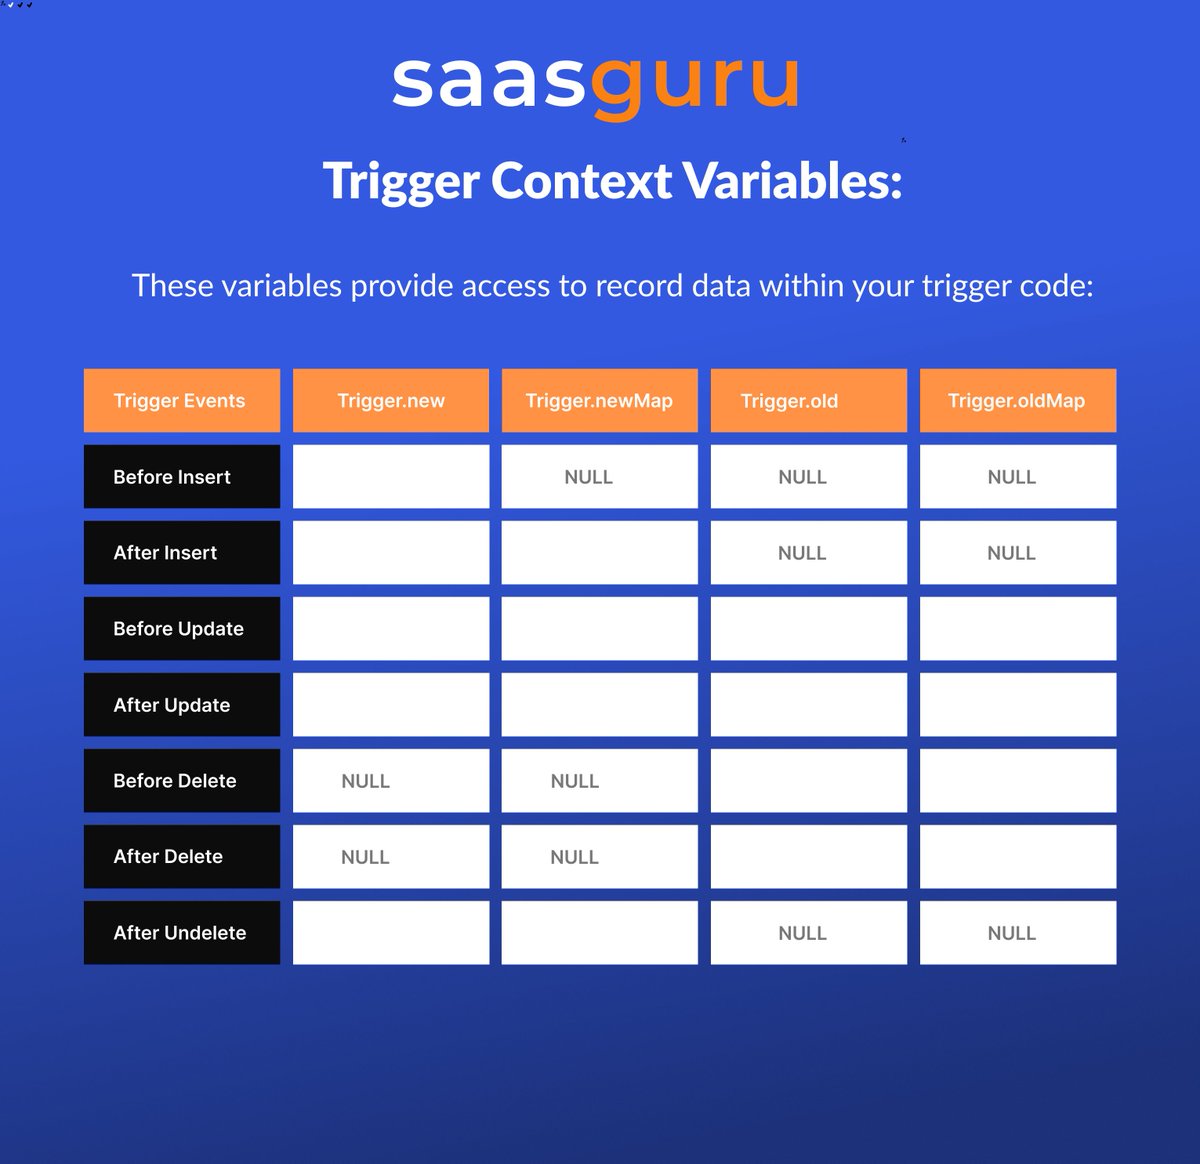 Need a quick reference to Salesforce Trigger Context Variables? 🌟

Save or screenshot this handy overview to effortlessly navigate data management during trigger events. 📊🚀

#Salesforce #CRM #TechTips #SalesforceDevelopers #DataManagement #SaaSGuru #Technology